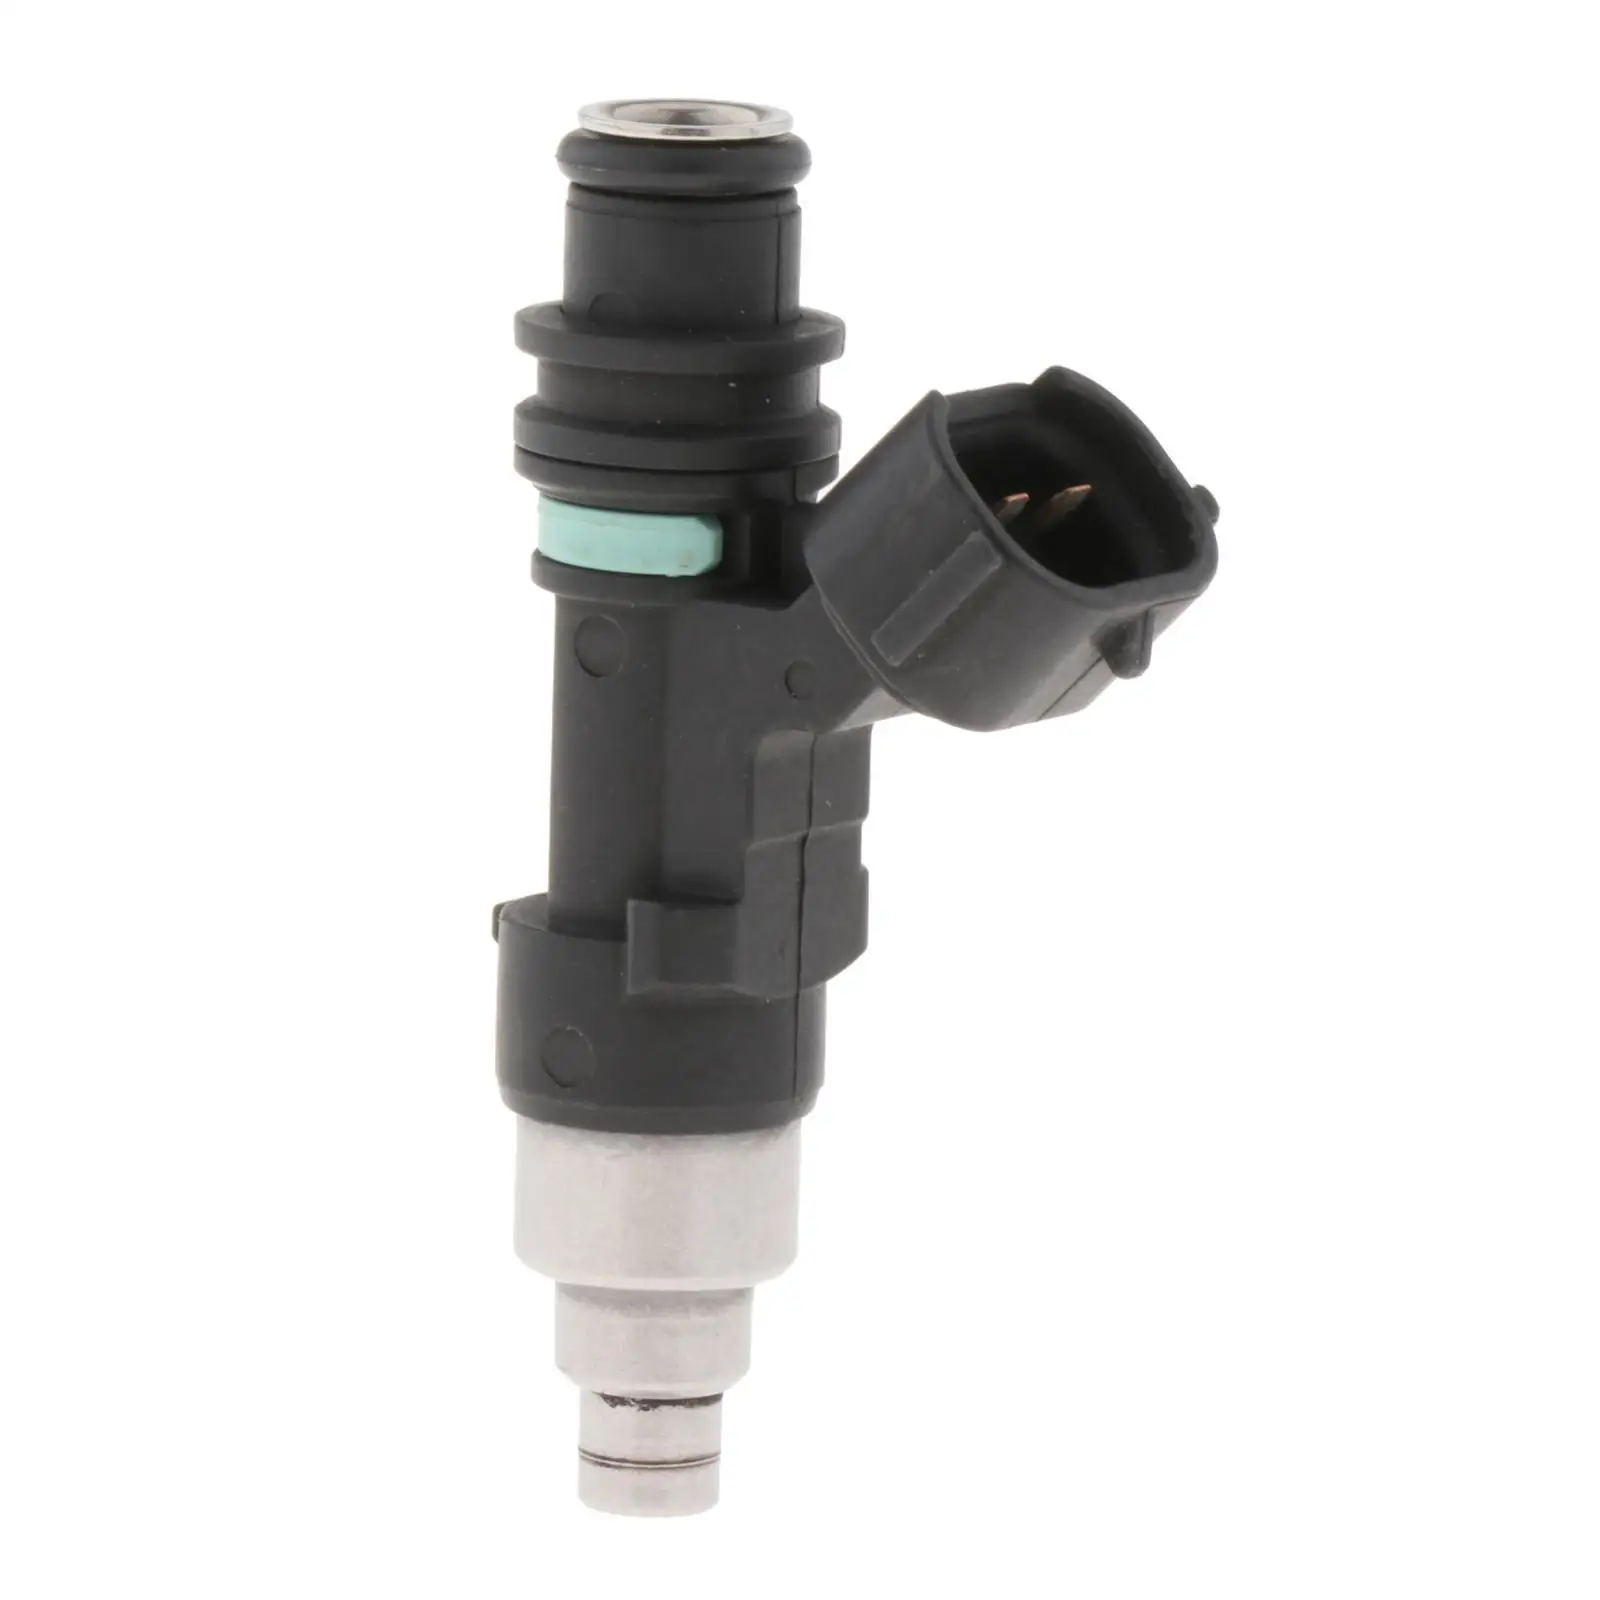 Fuel Injector Replacement 15710-82K50 for Suzuki Outboard DF 90 2015 Boat Parts High Performance Durable Premium